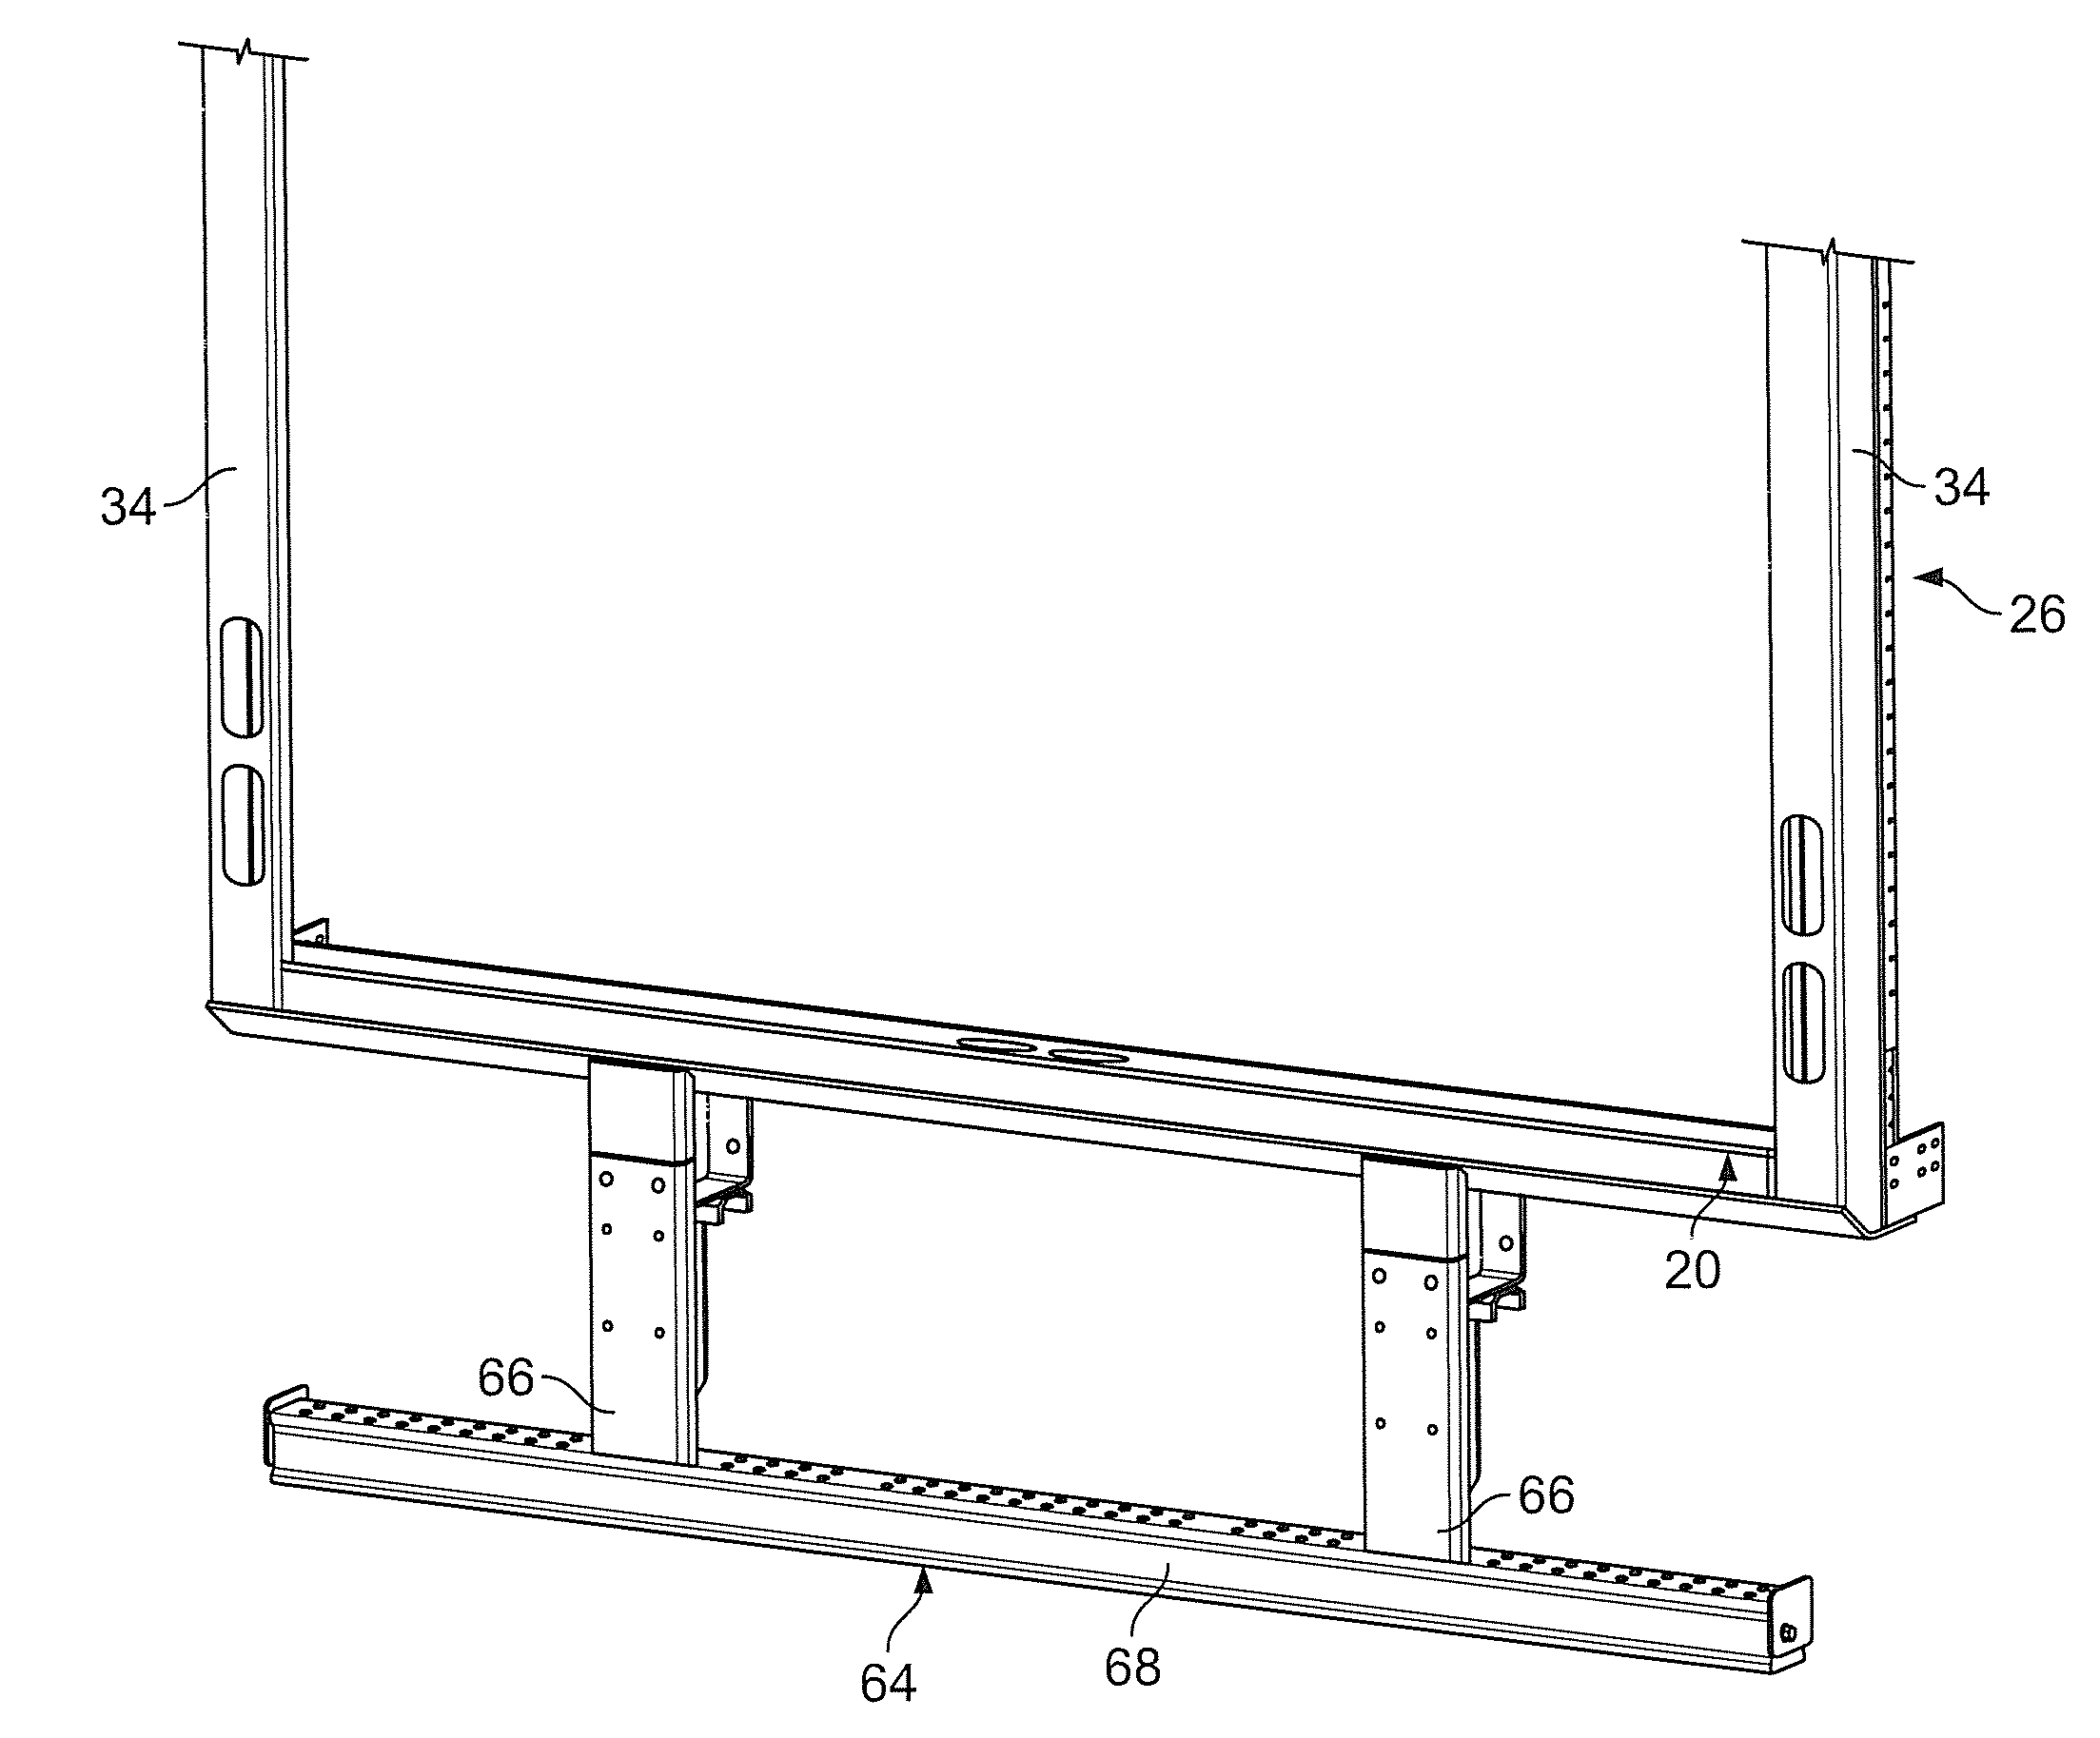 Trailer rear door frame with angled rear sill